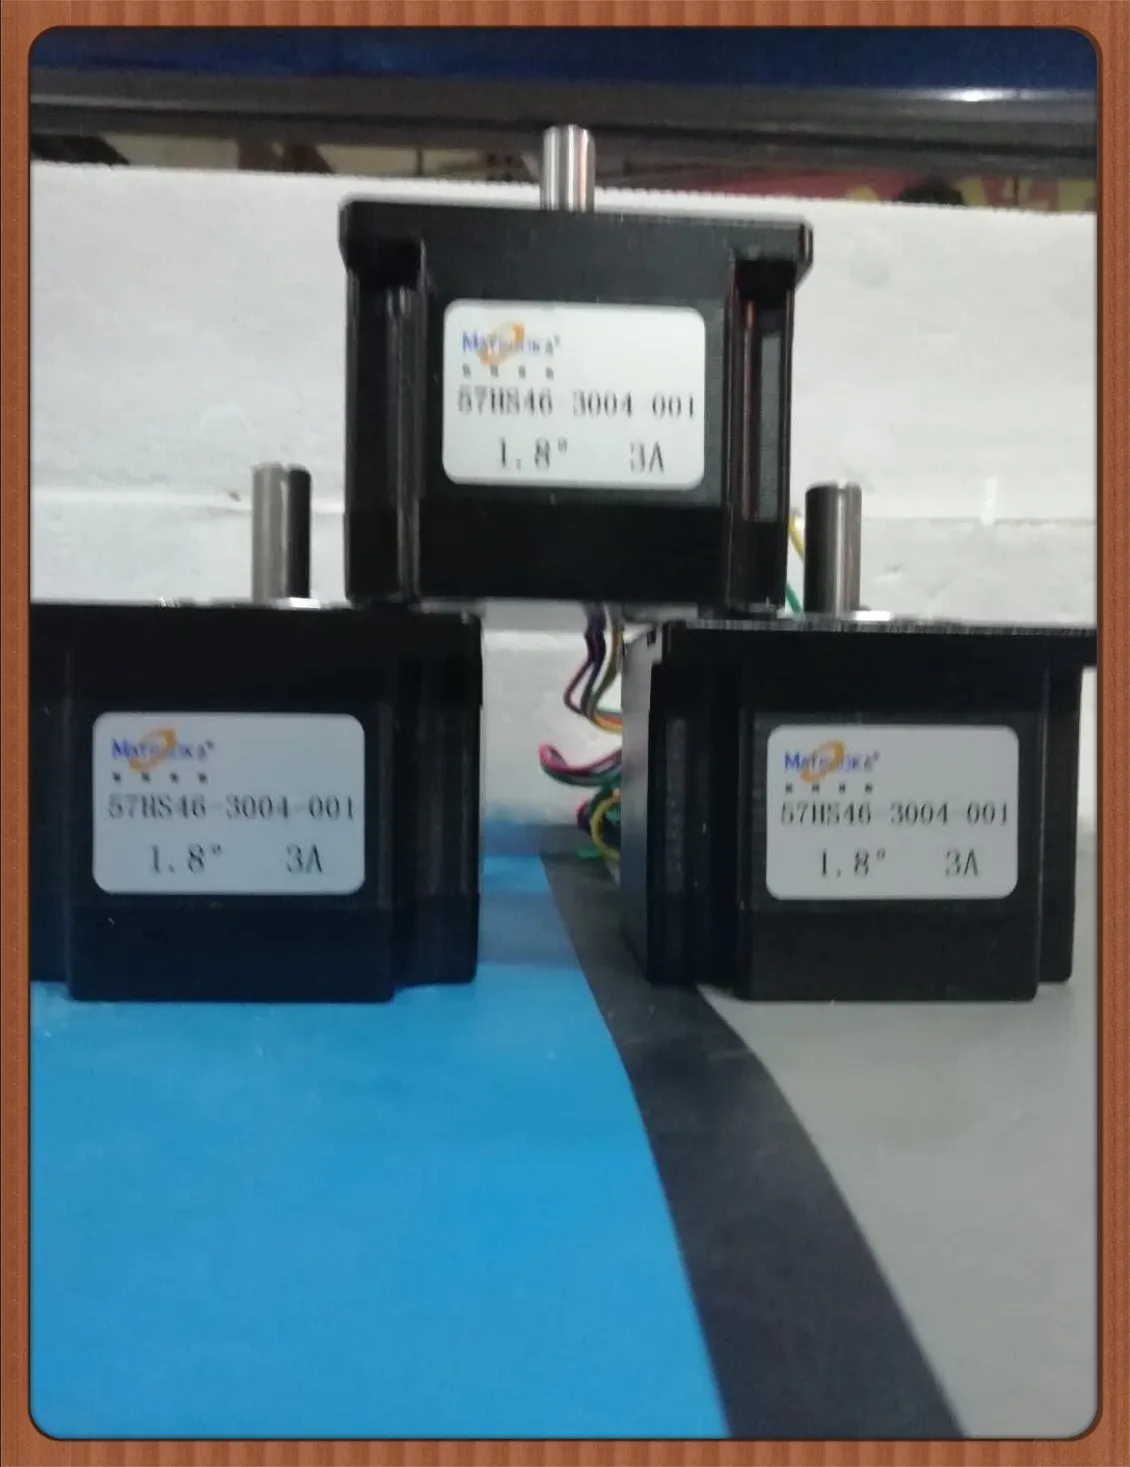 

Songgang motor 57 stepper motor hs46 57-3004-001 46 trunnion 8 steps away from the Angle of 1.8 ° fuselage